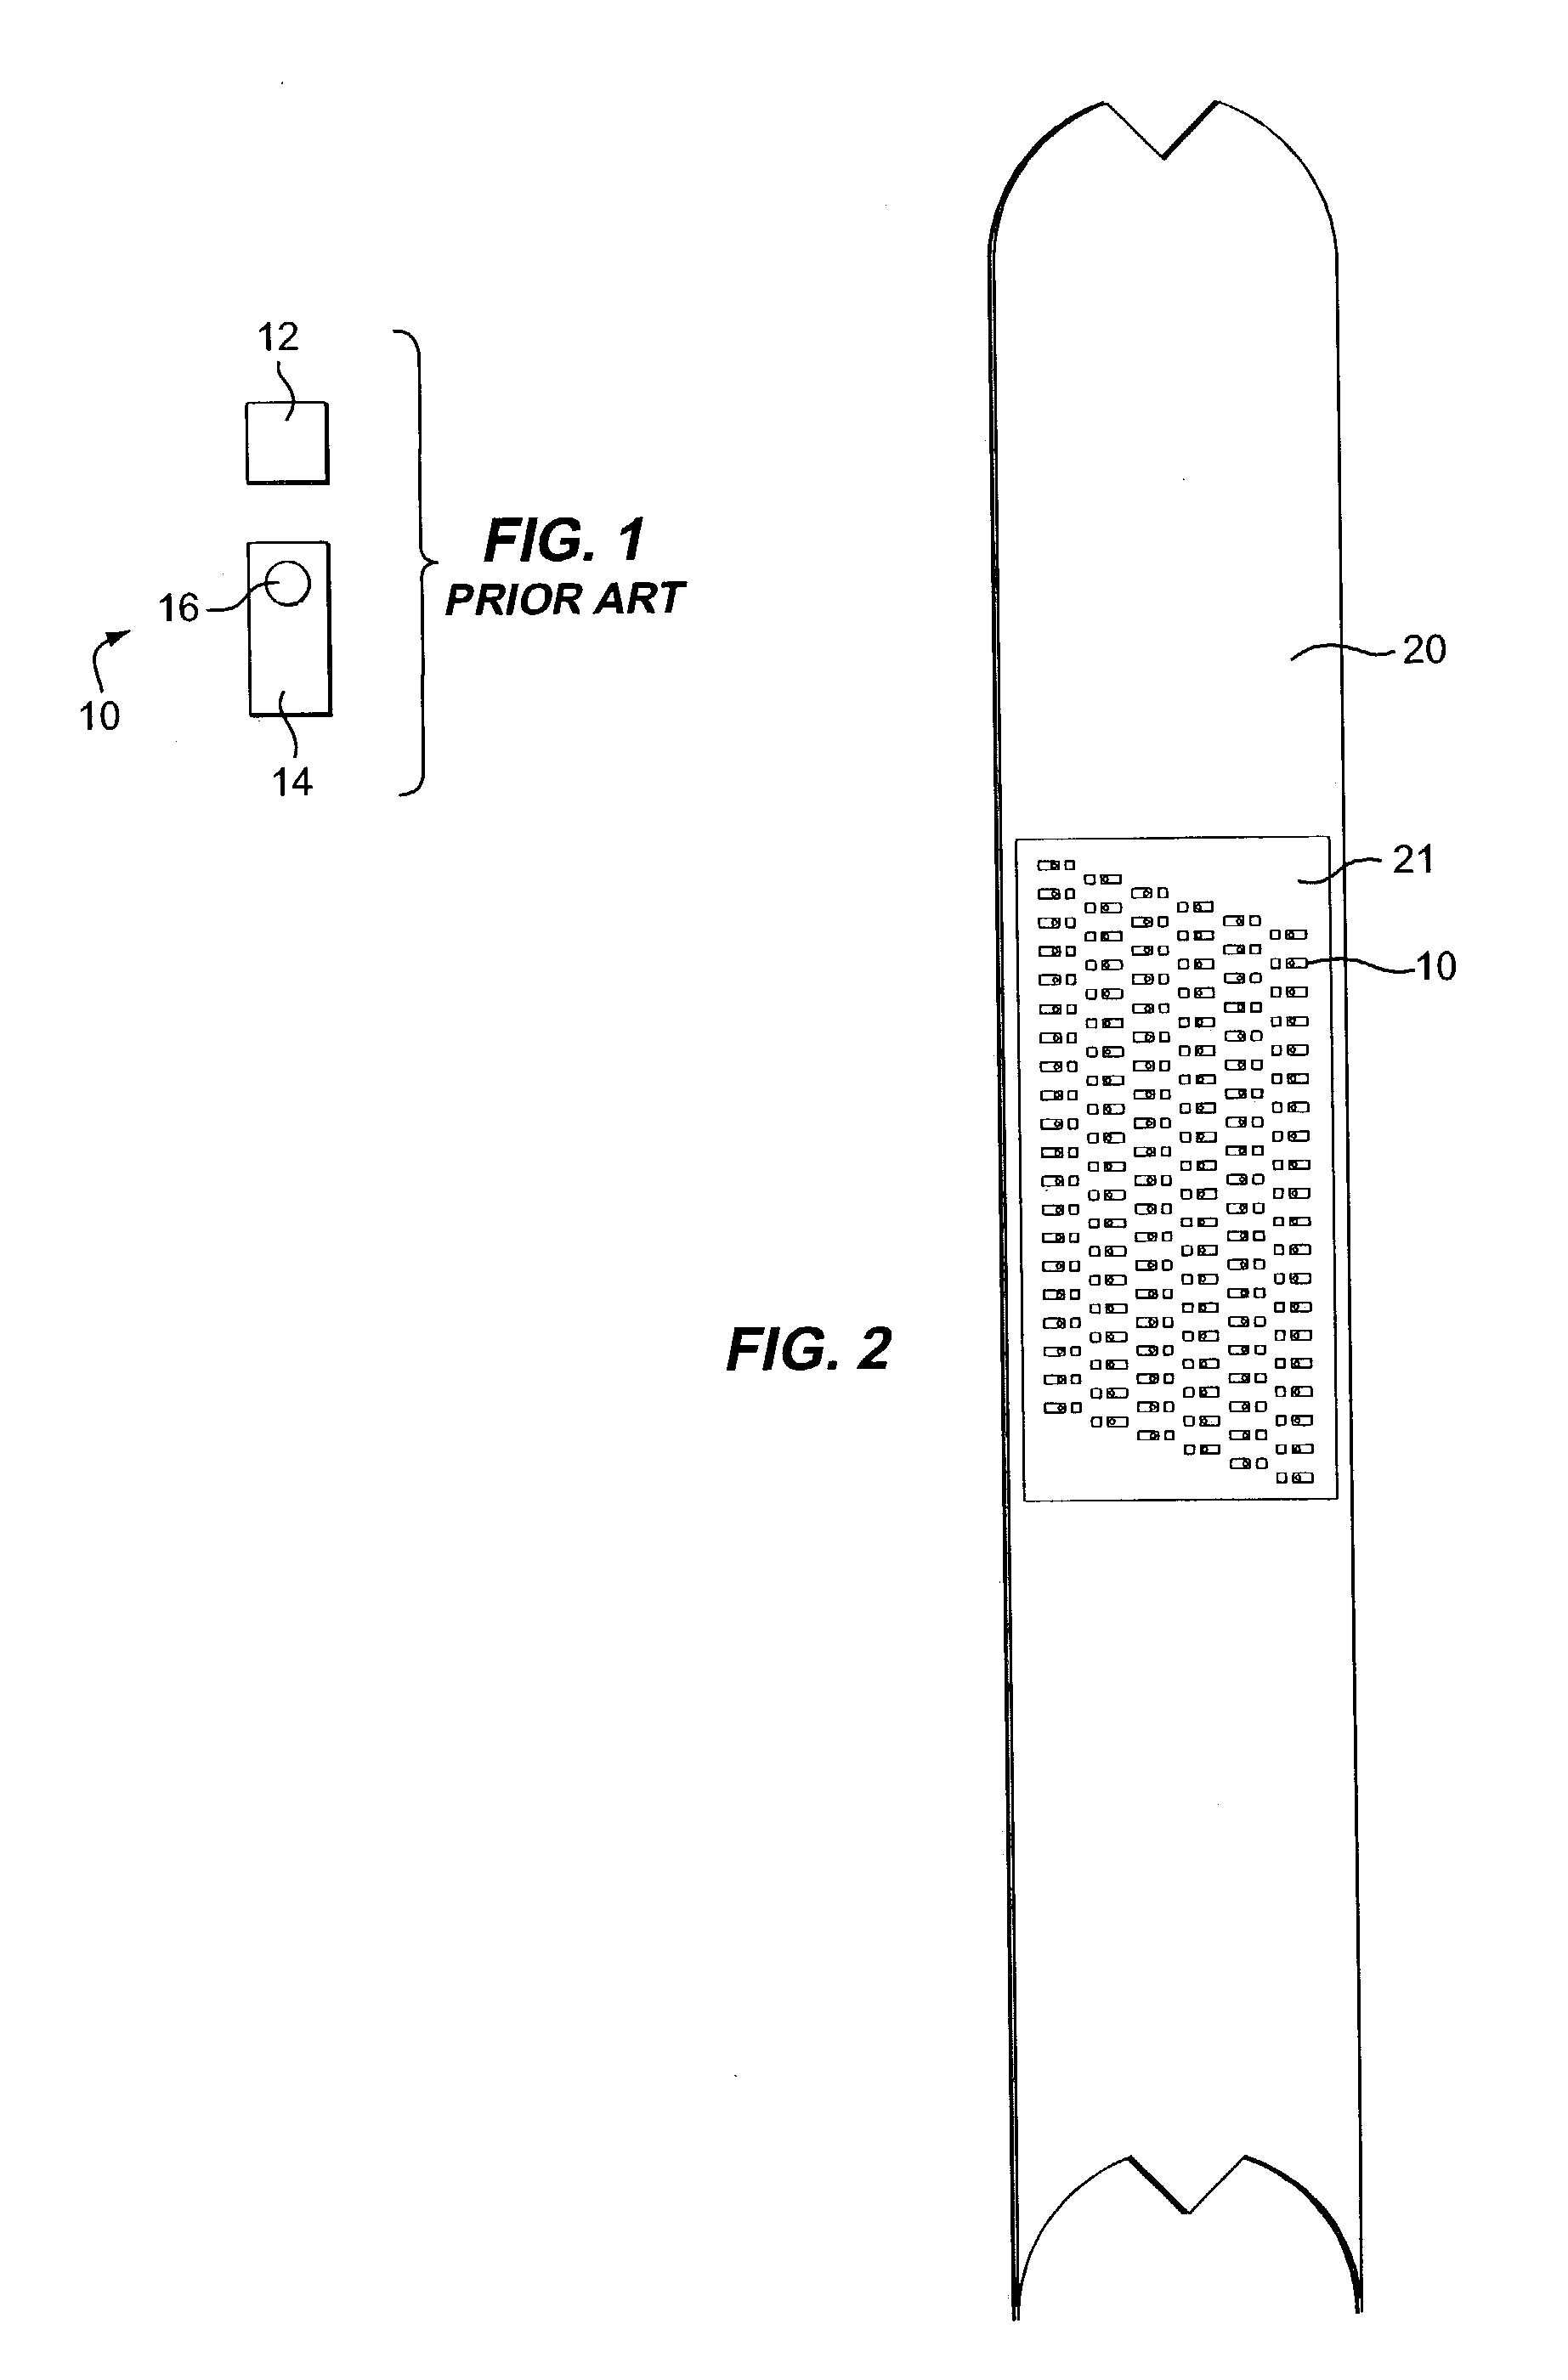 Light emitting apparatus and method for curing inks, coatings and adhesives